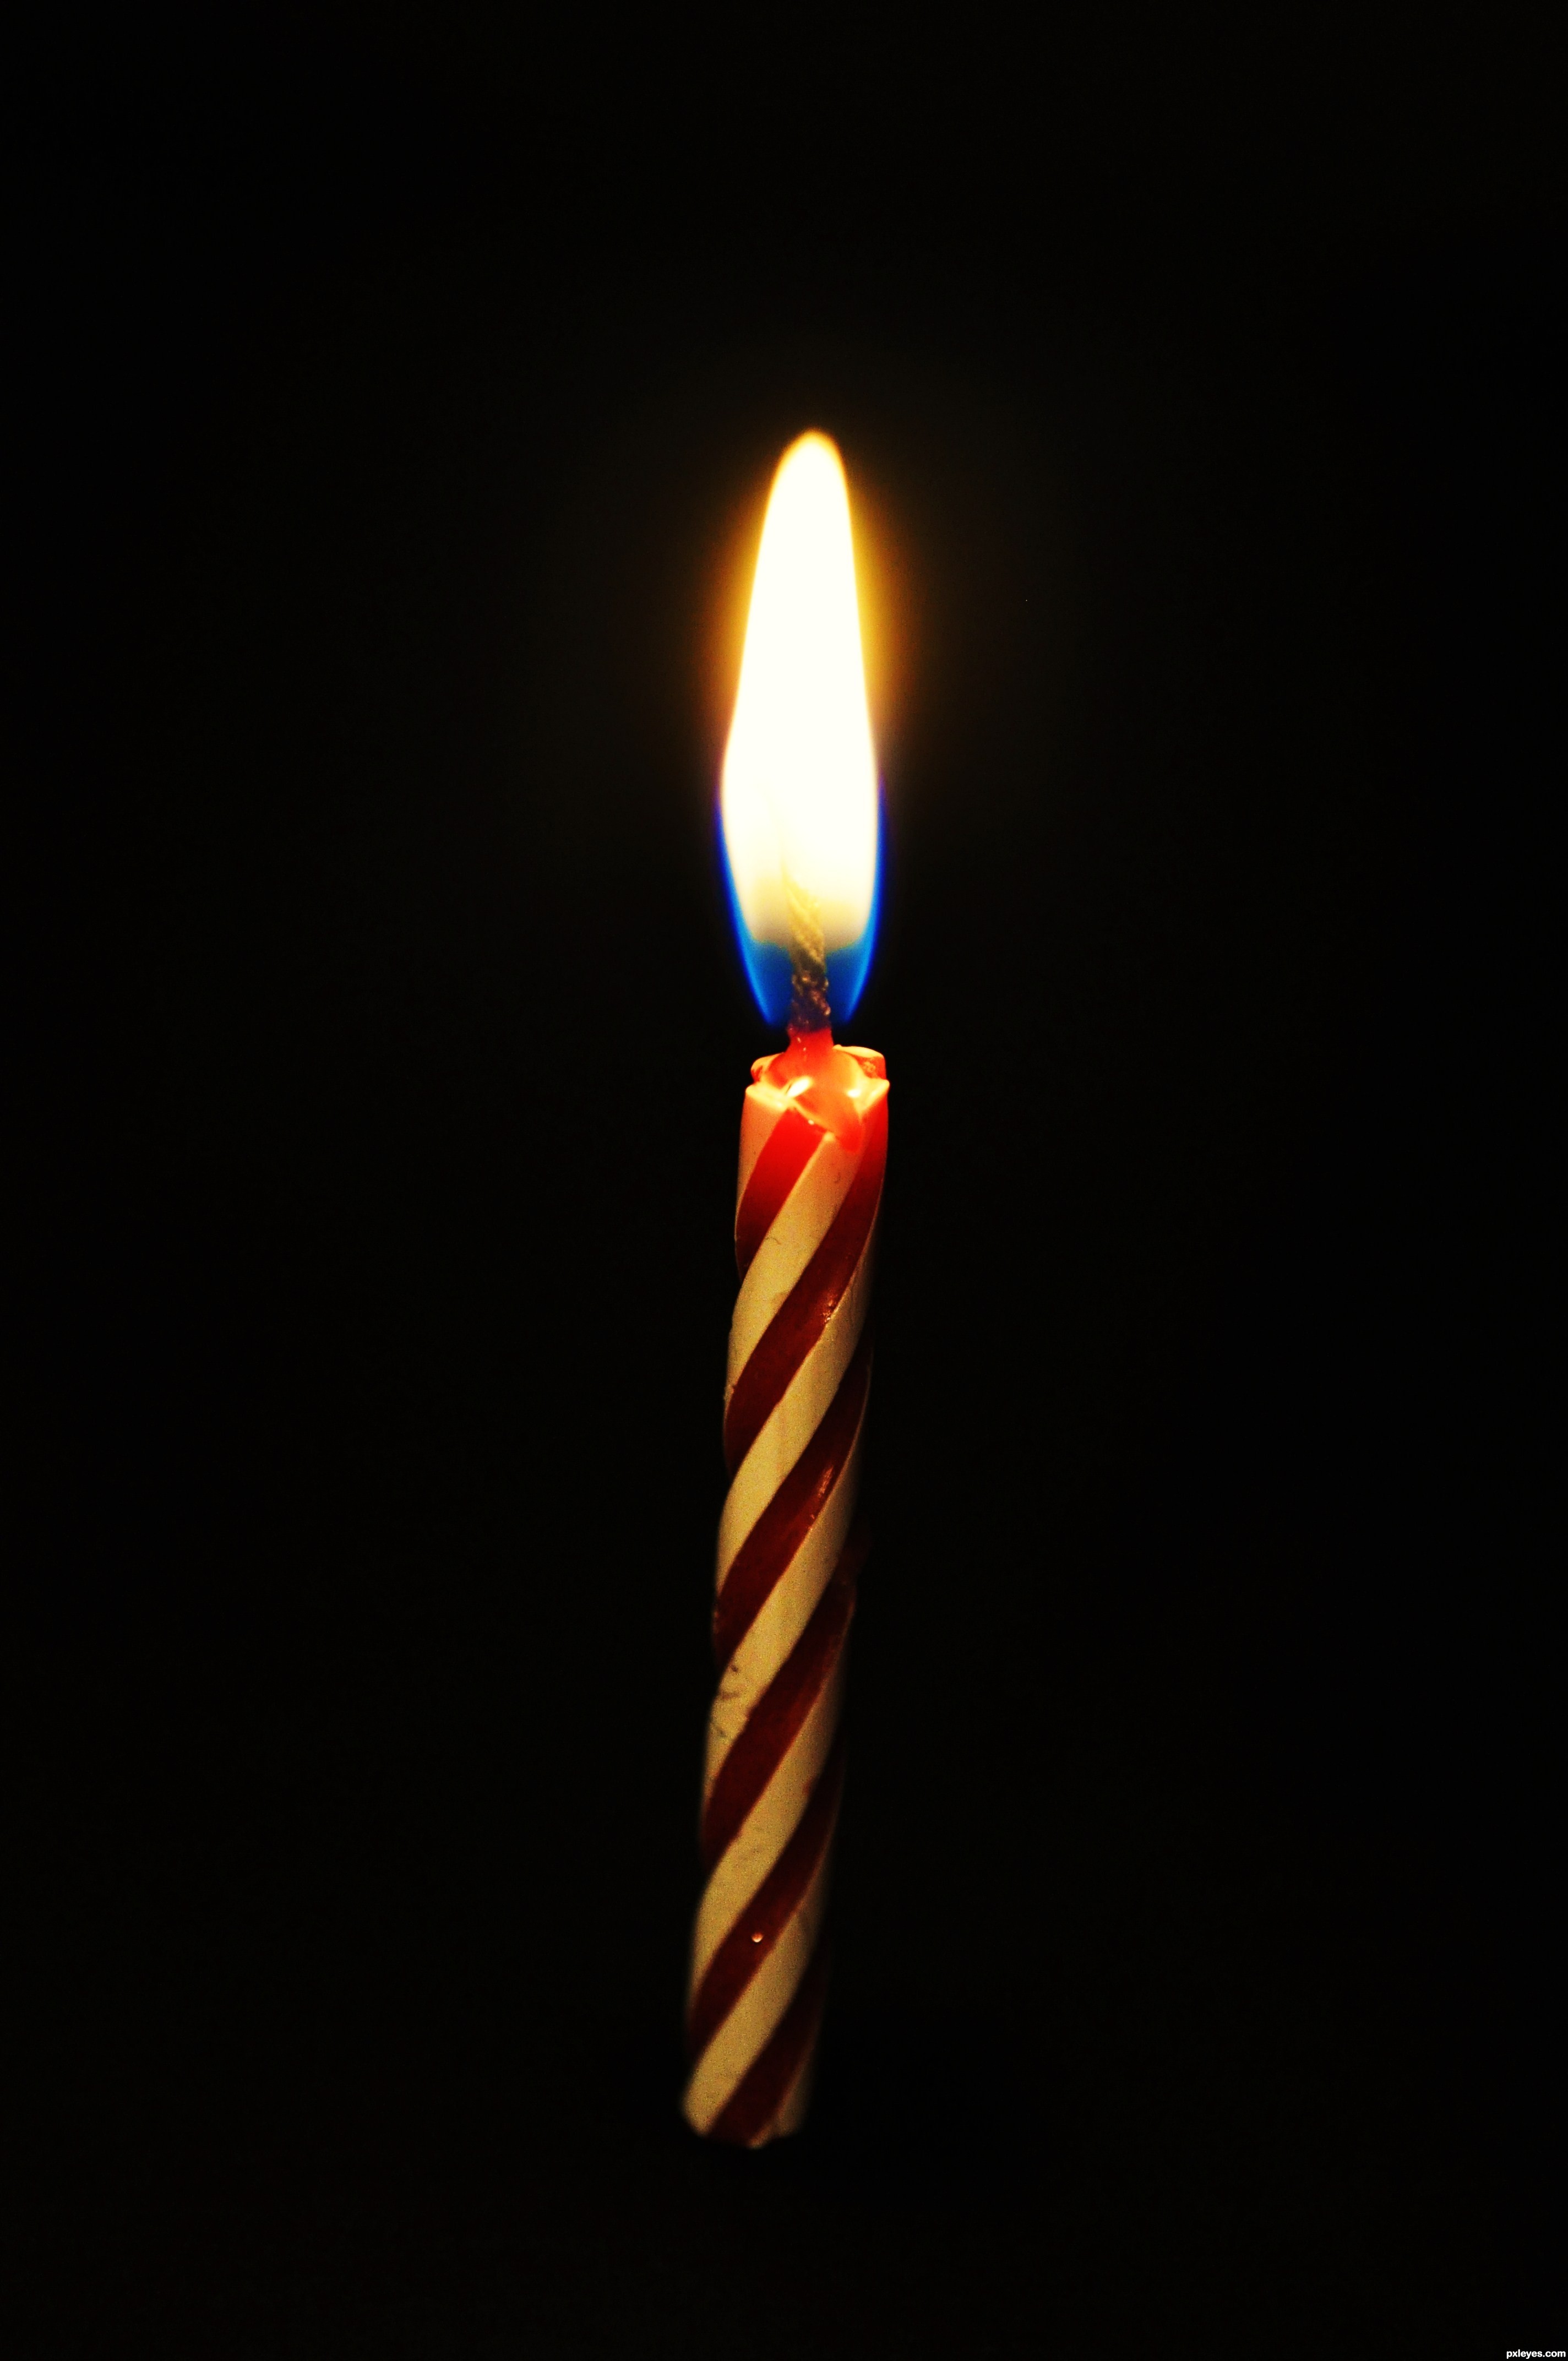 Cake Candles Fireworks - HD Photos Gallery